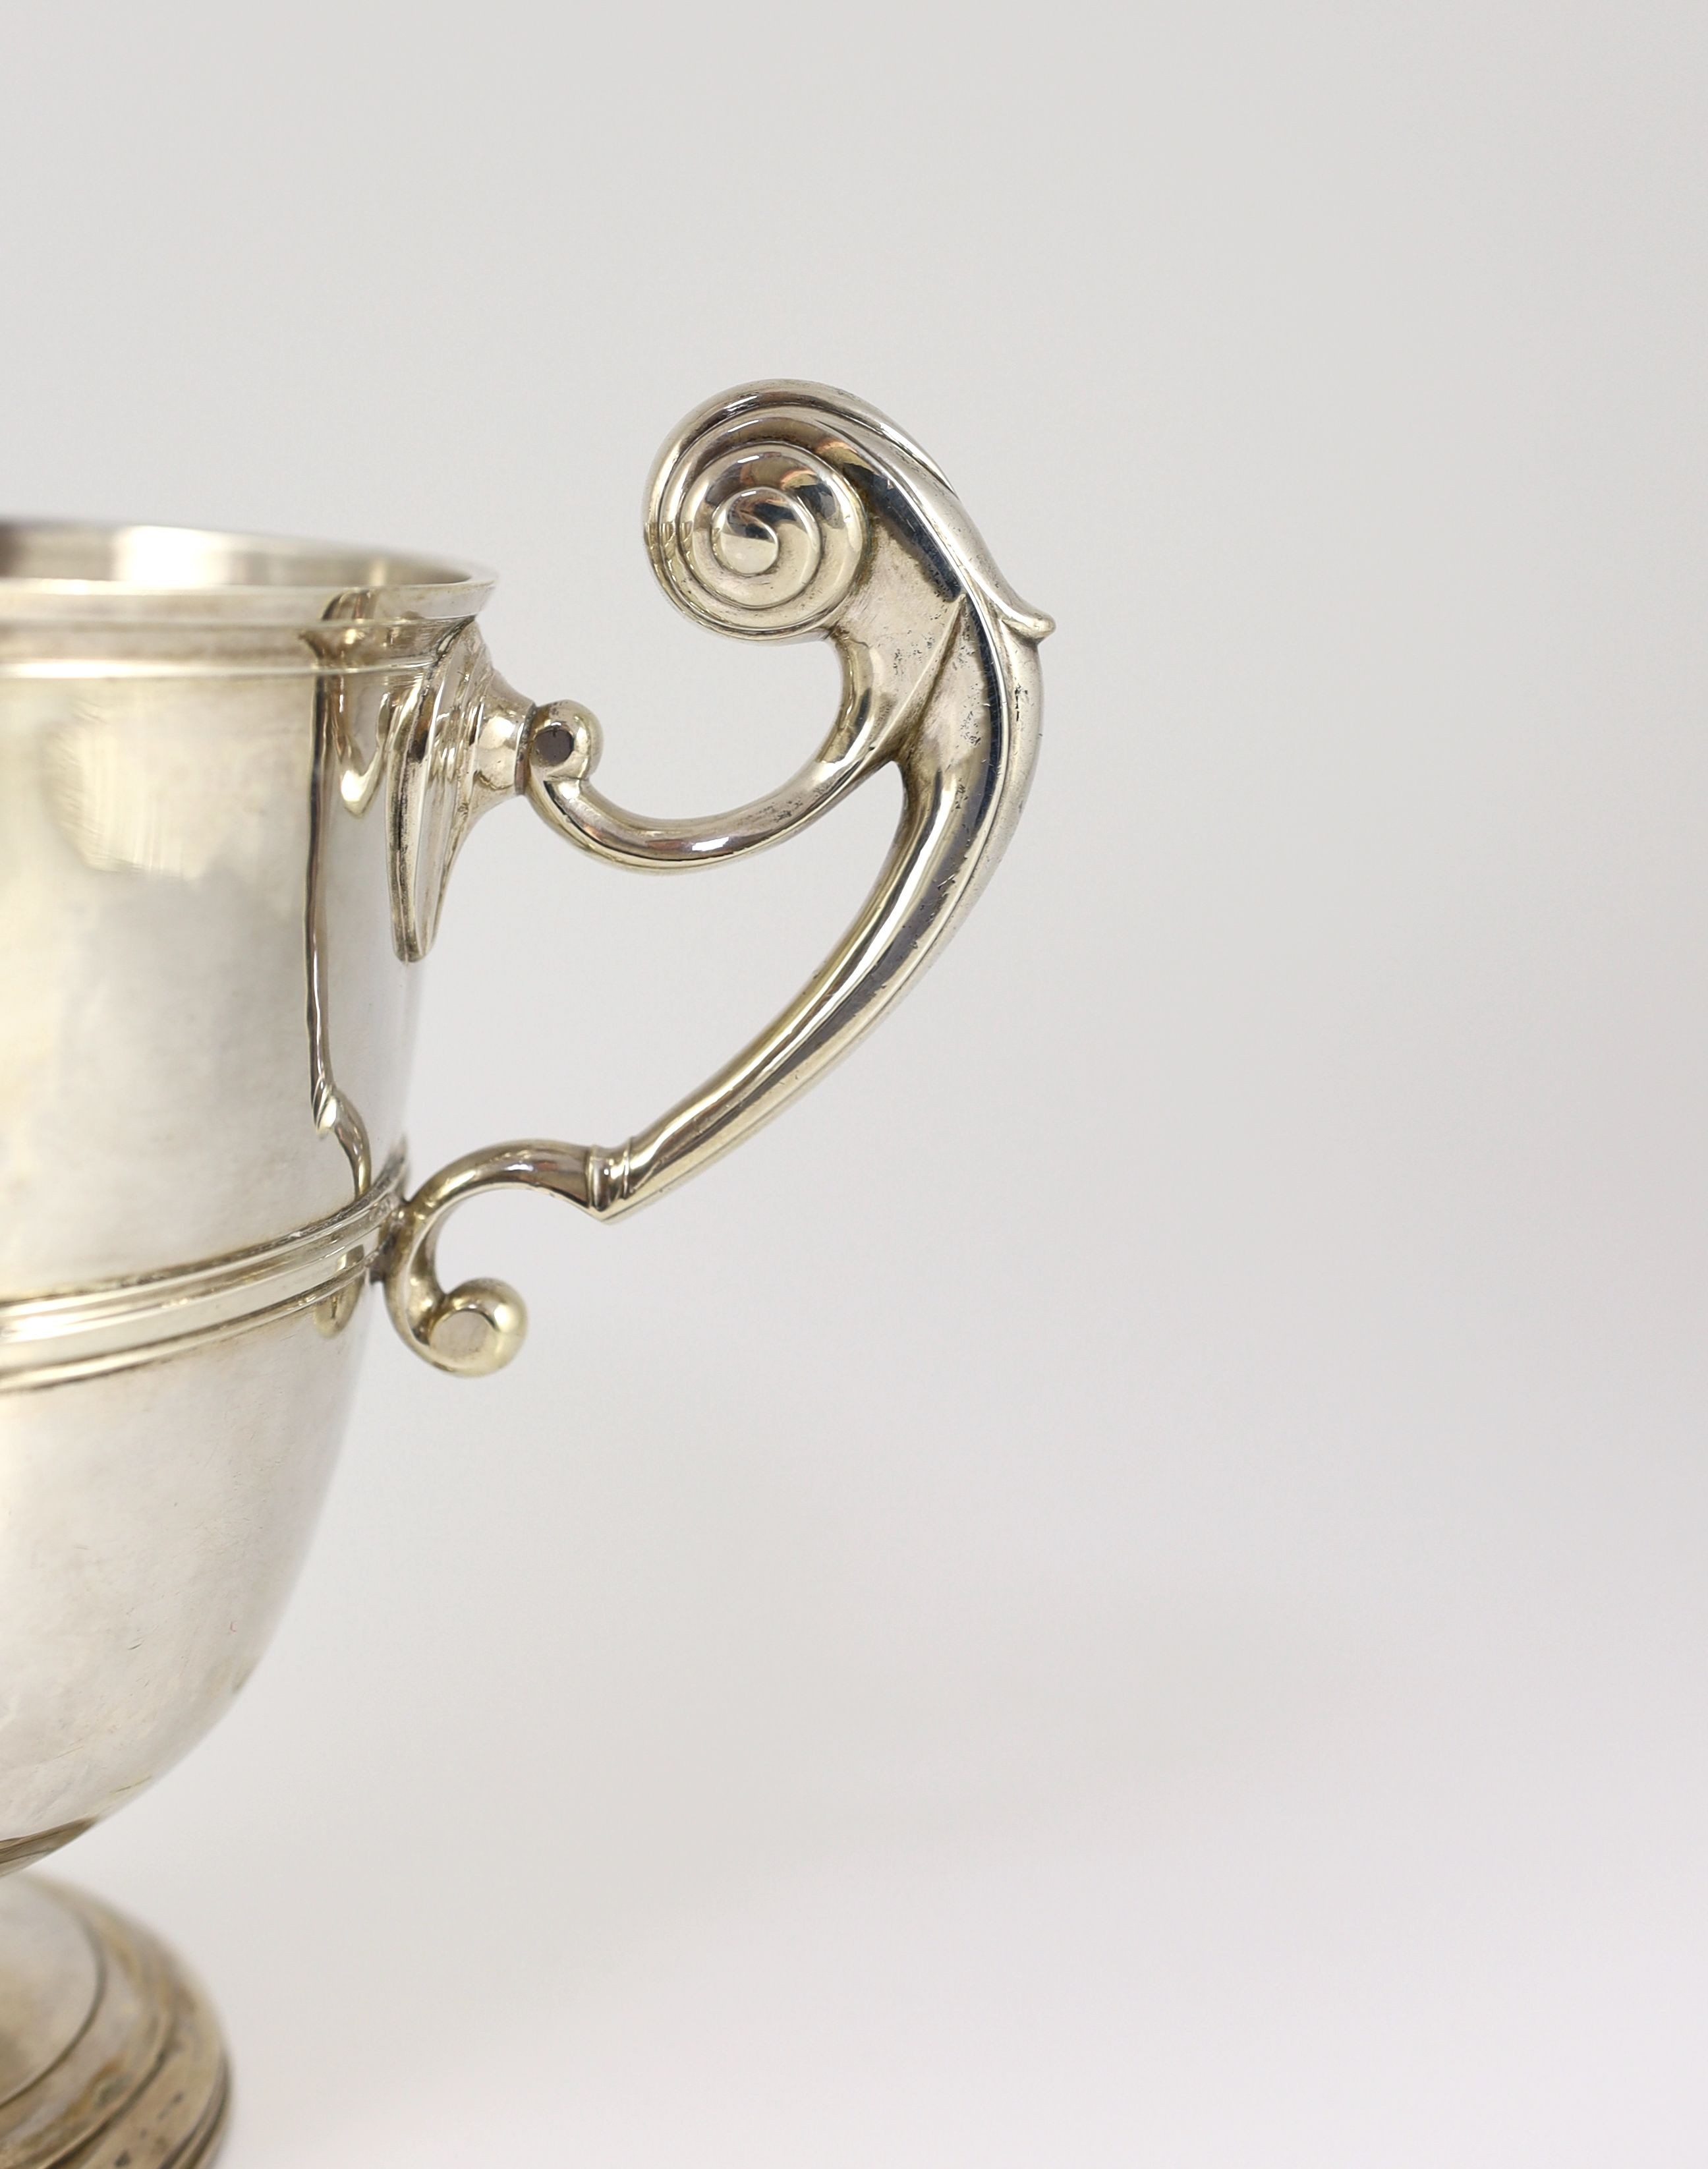 A George II Irish silver two handled presentation trophy cup, maker's mark rubbed